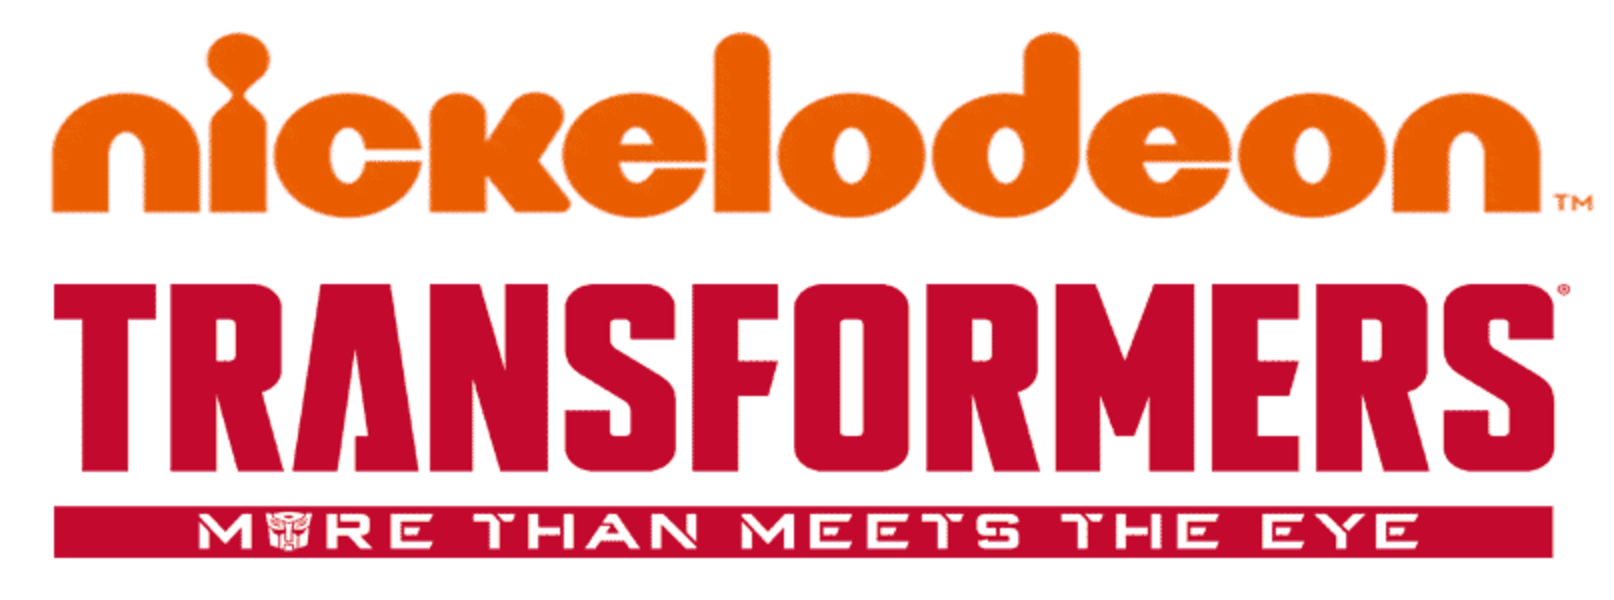 Transformers Coming in 2022 - The Nickelodeon Virtual Upfront Show: Bring Your Kids!